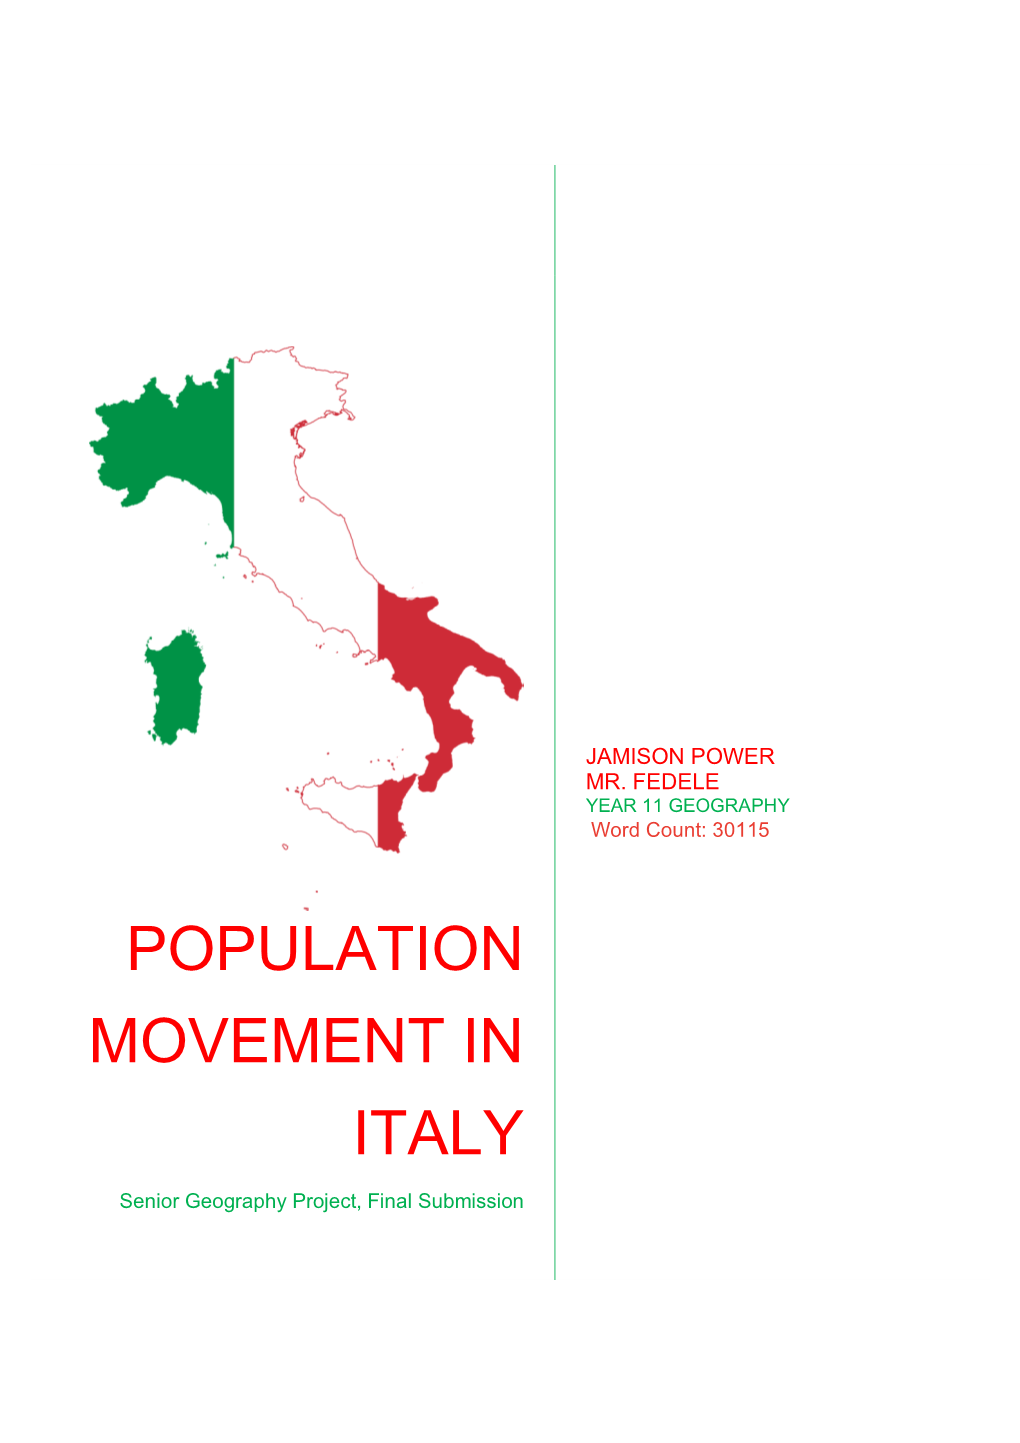 Population Movement in Italy